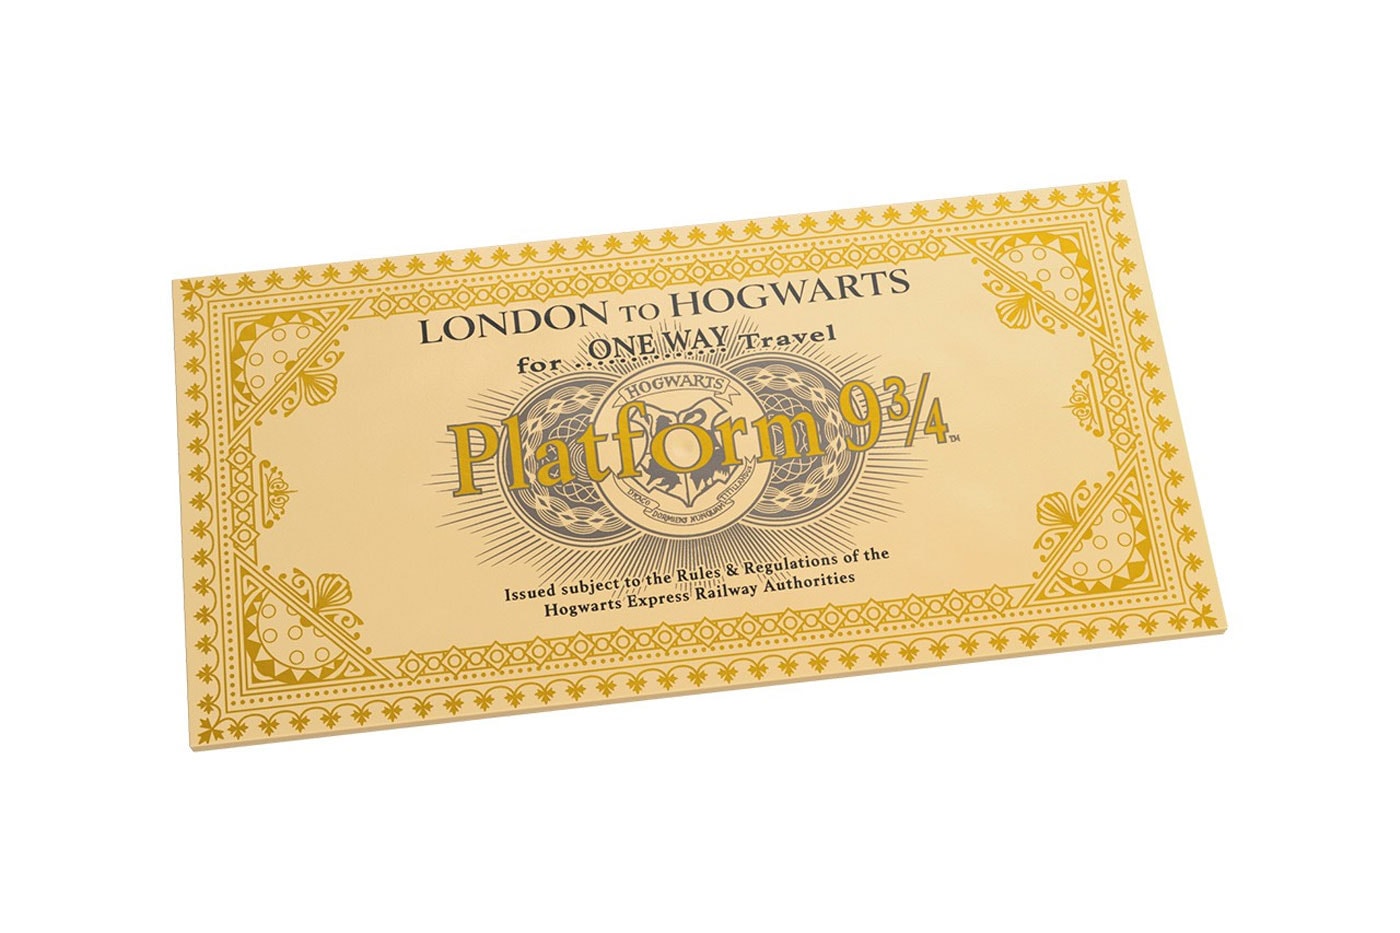 LEGO harry potter Hogwarts Express train kings cross station railway platform Collectors Edition release info date price 